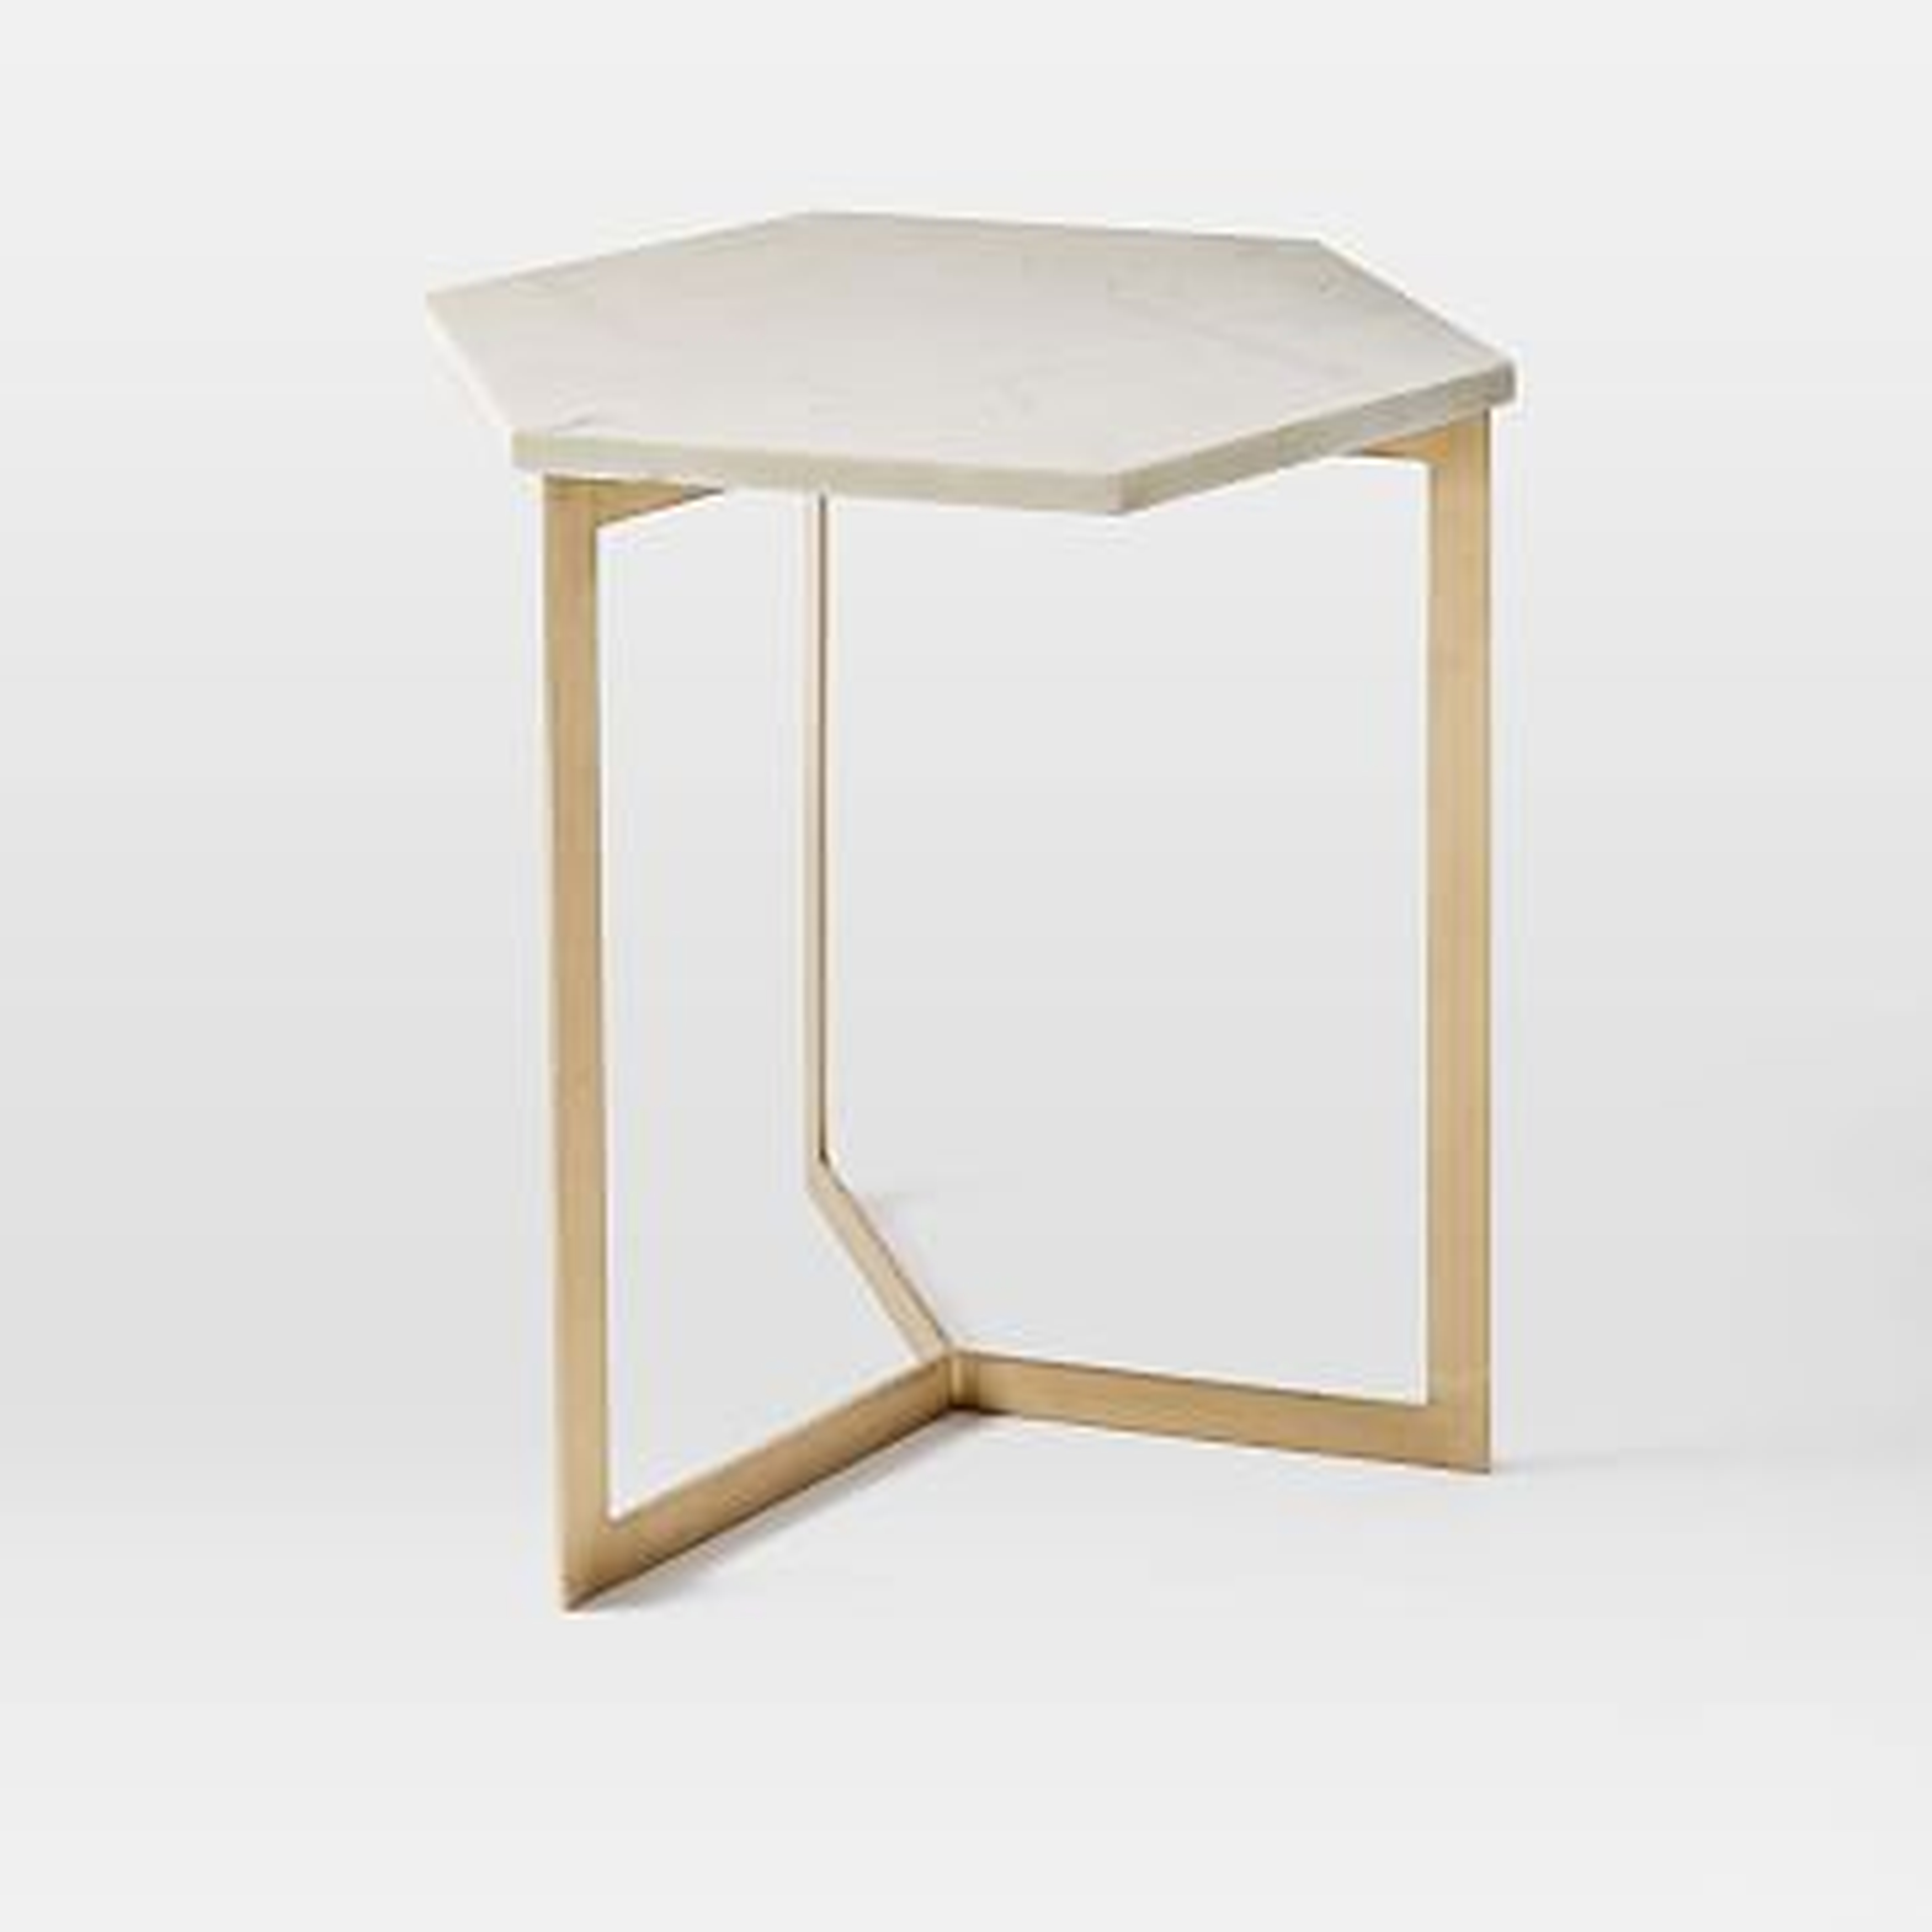 Hex Side Table White Marble, Antique Brass, White Glove - West Elm